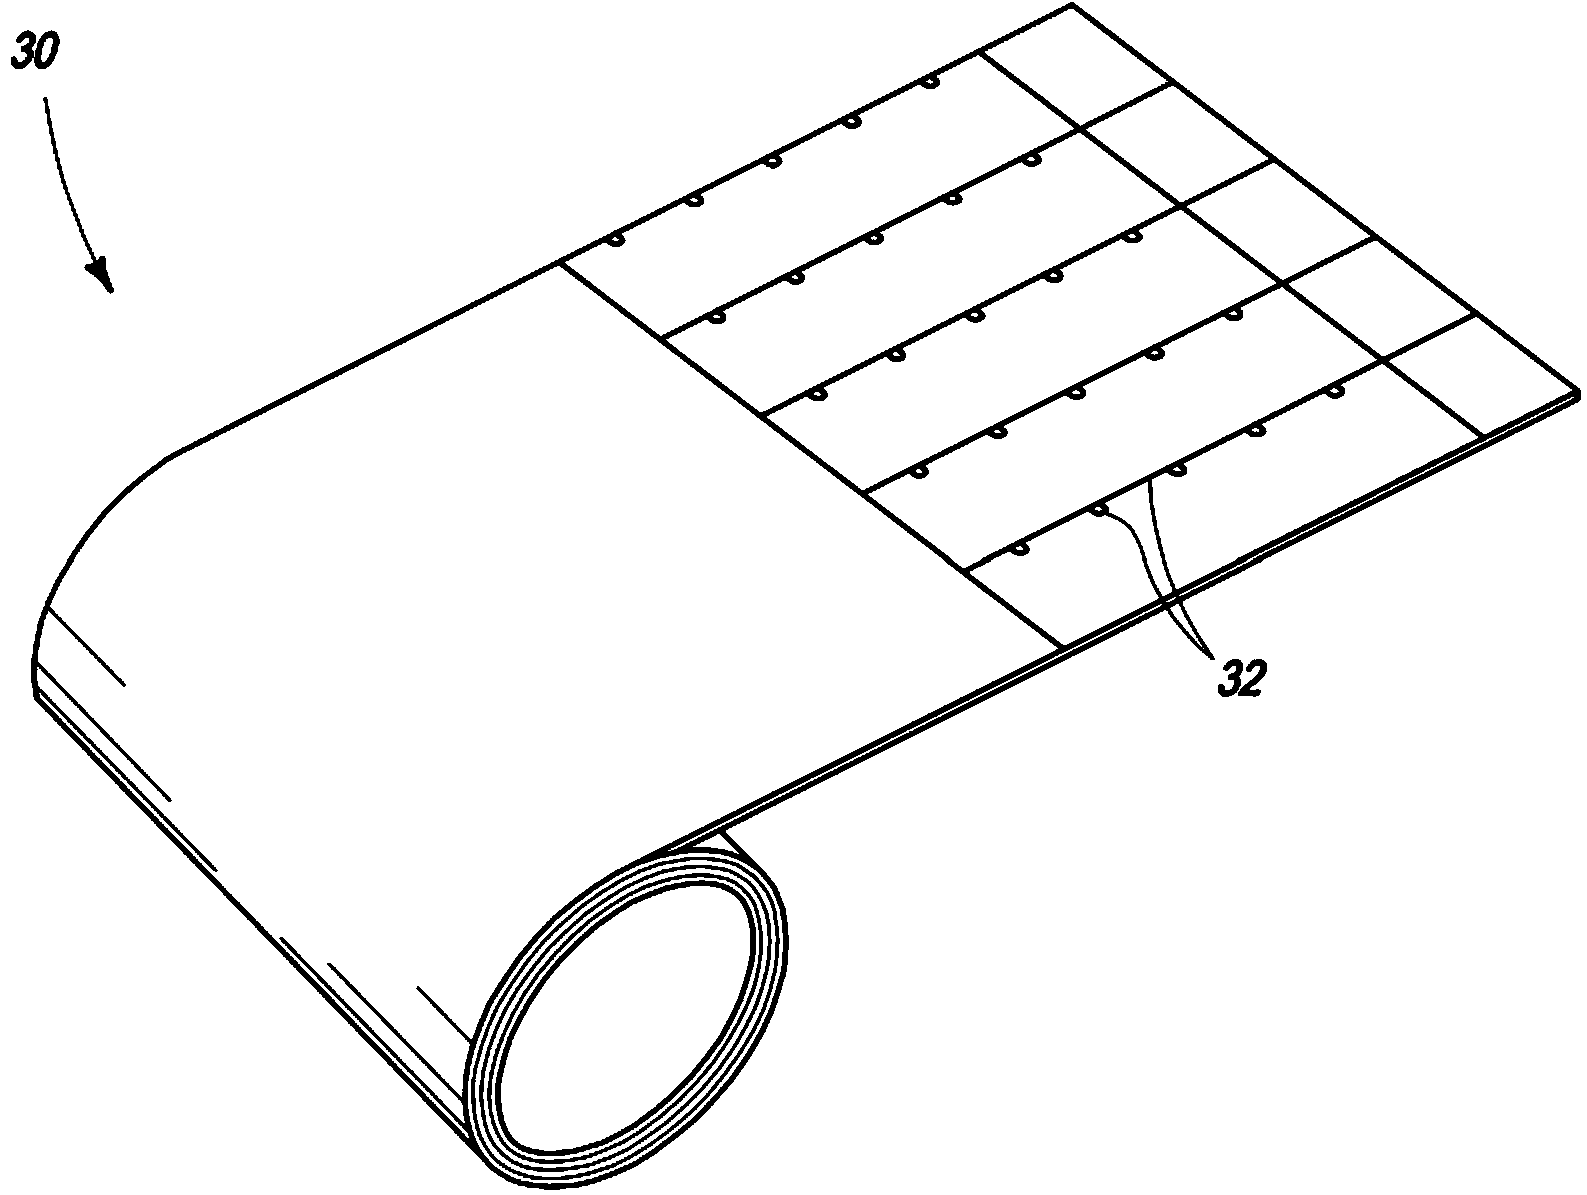 Integrated thin film solar cell interconnection